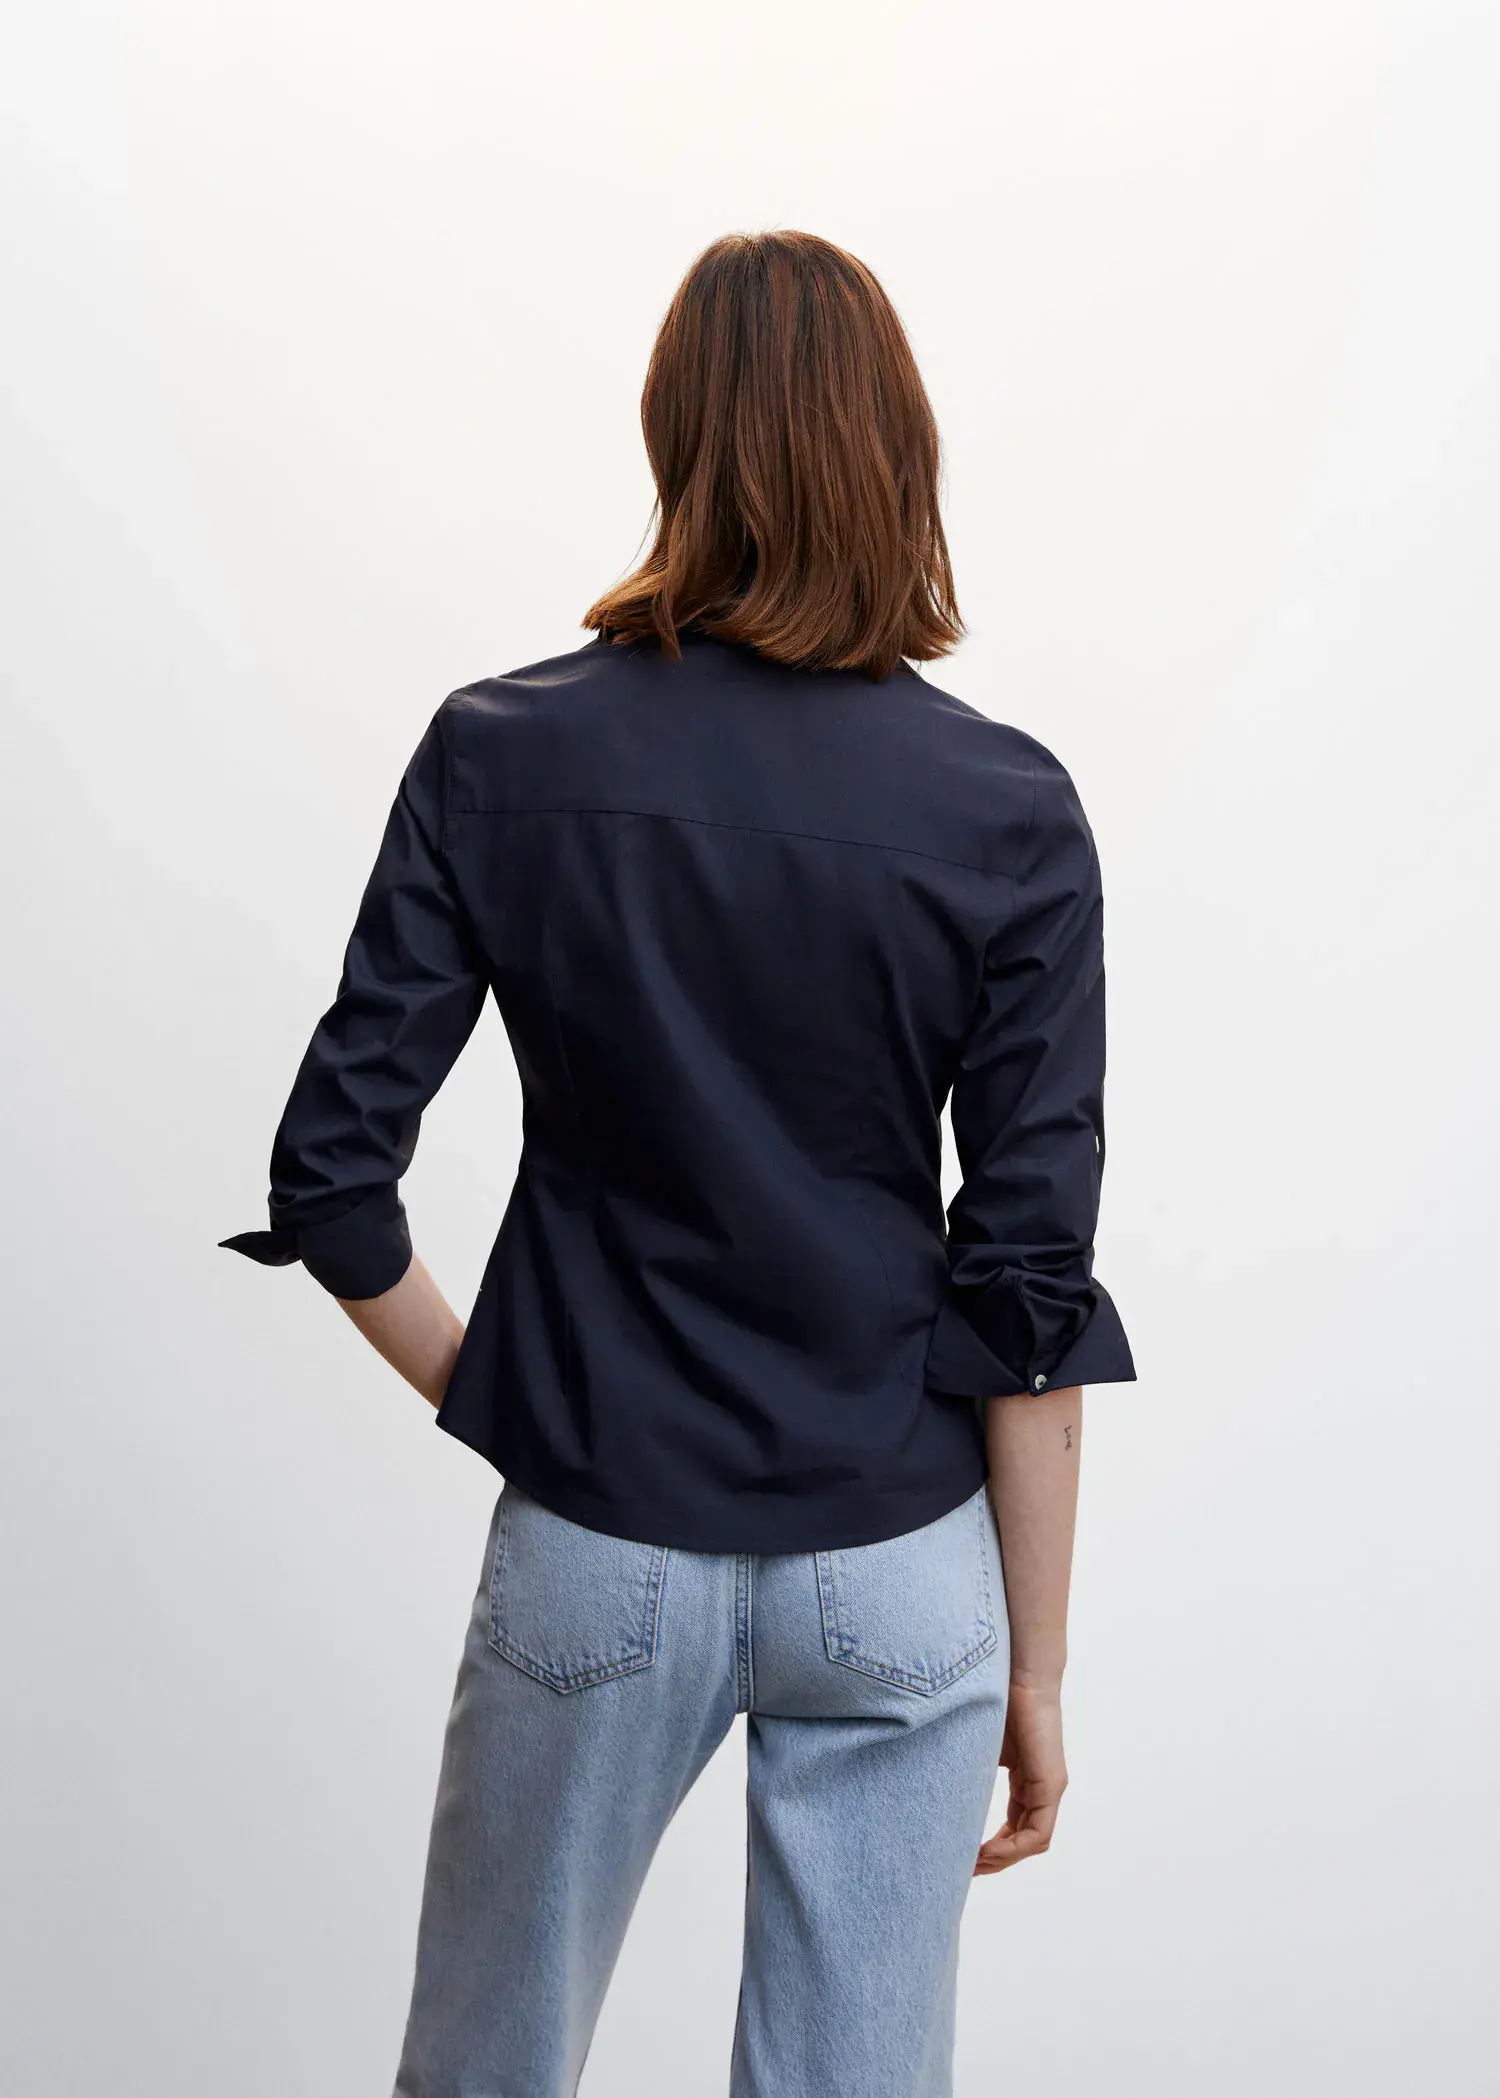 Mango Pleated cotton shirt. a woman wearing a black shirt and jeans. 